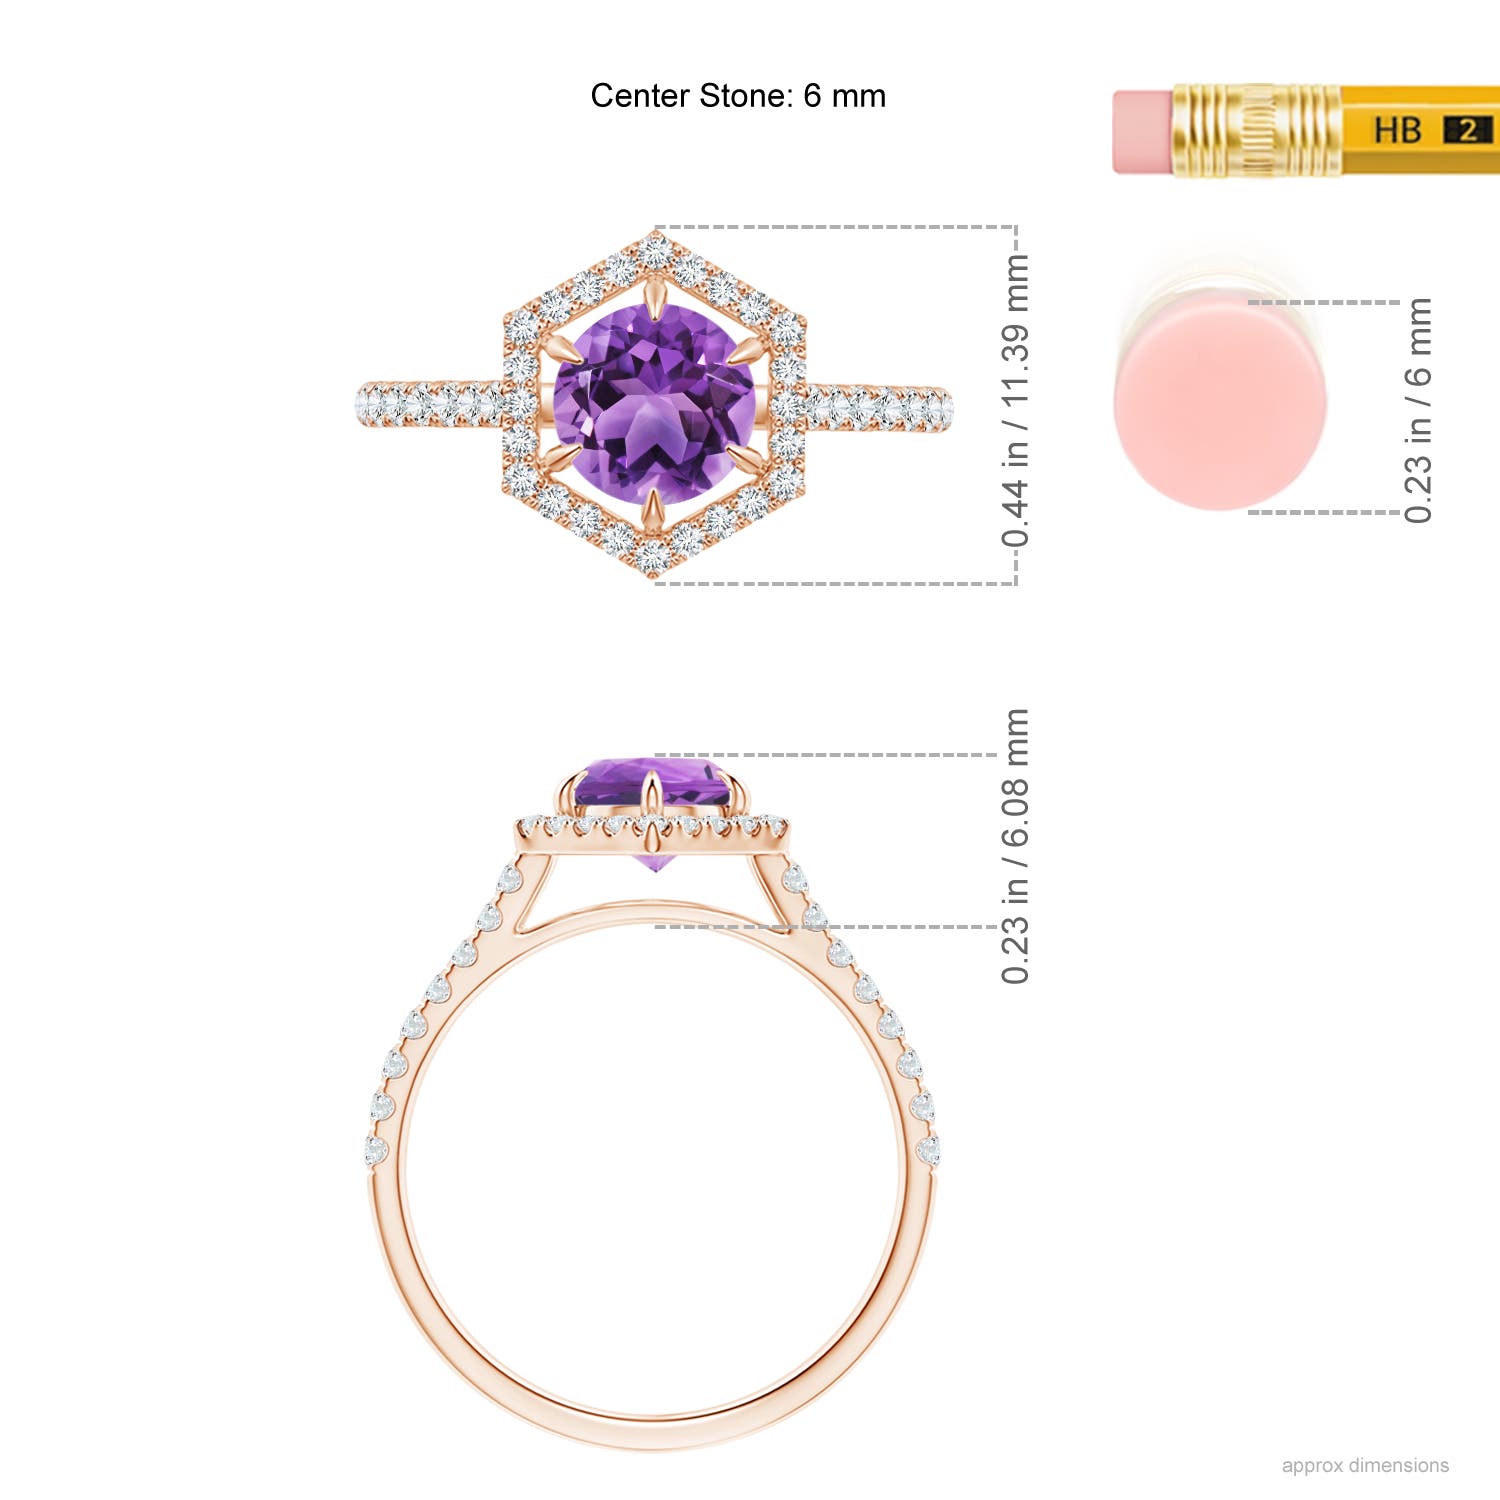 AA - Amethyst / 1.14 CT / 14 KT Rose Gold